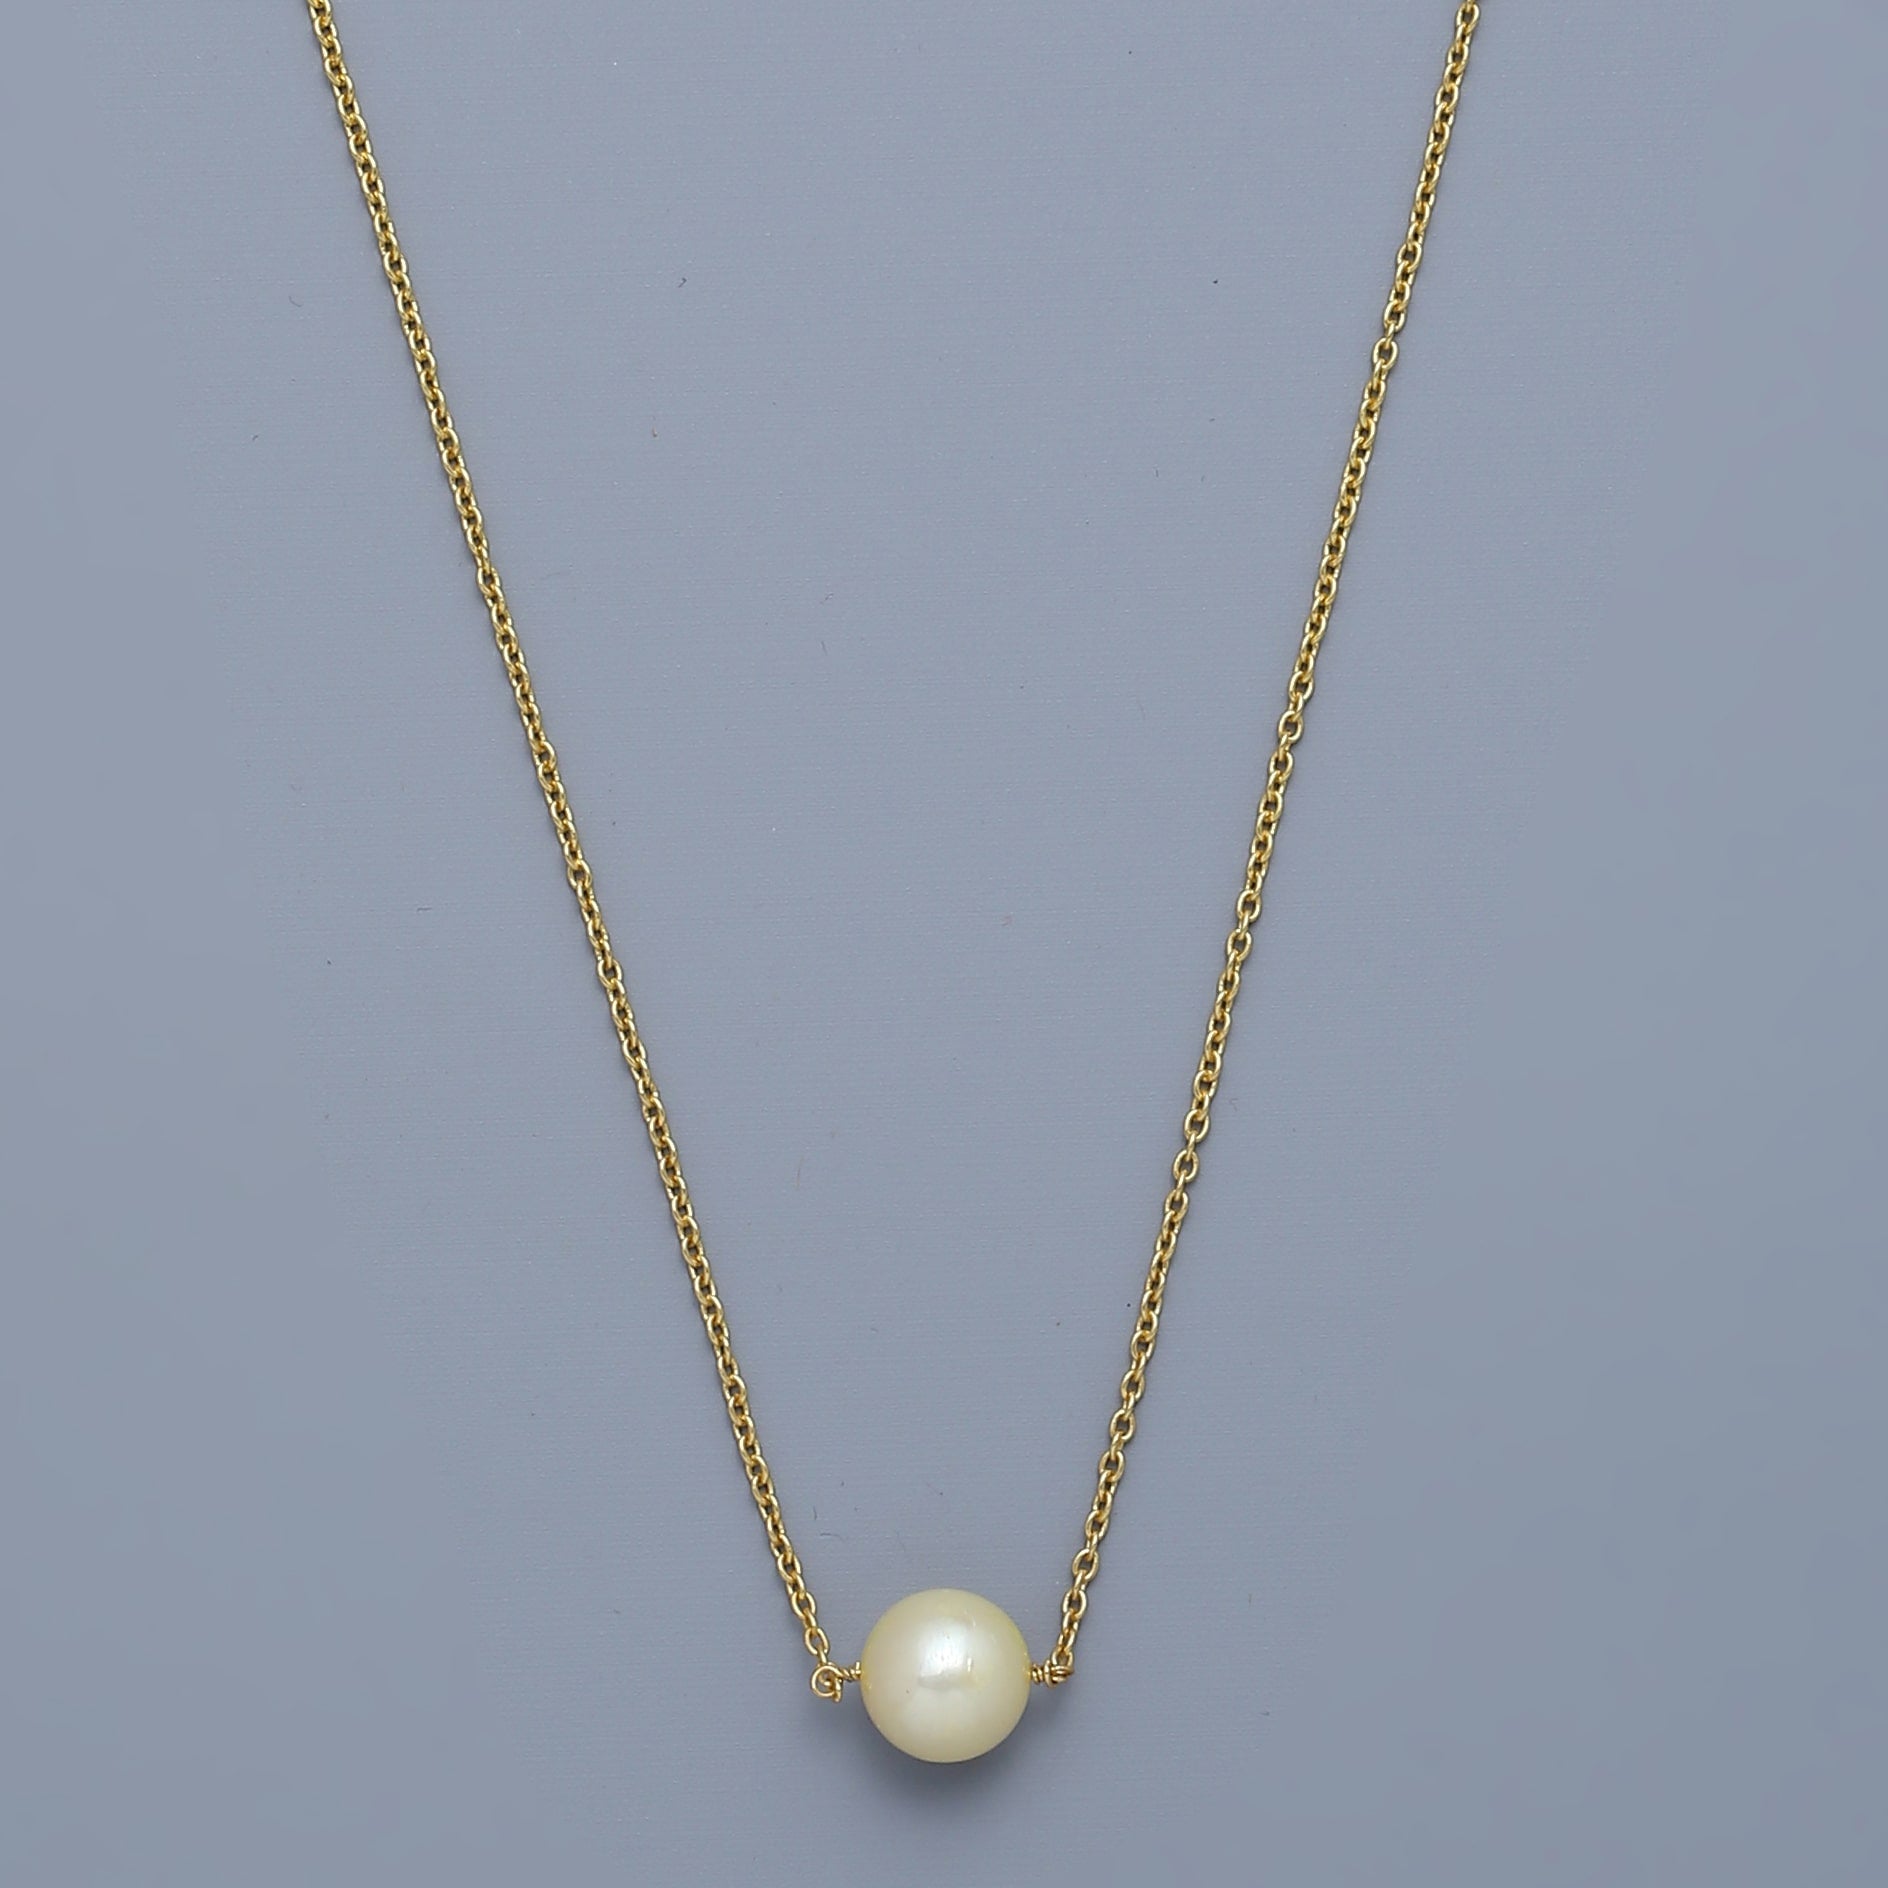 Single Pearl Drop Back Necklace | Back necklace, Pearl drop, Pearls